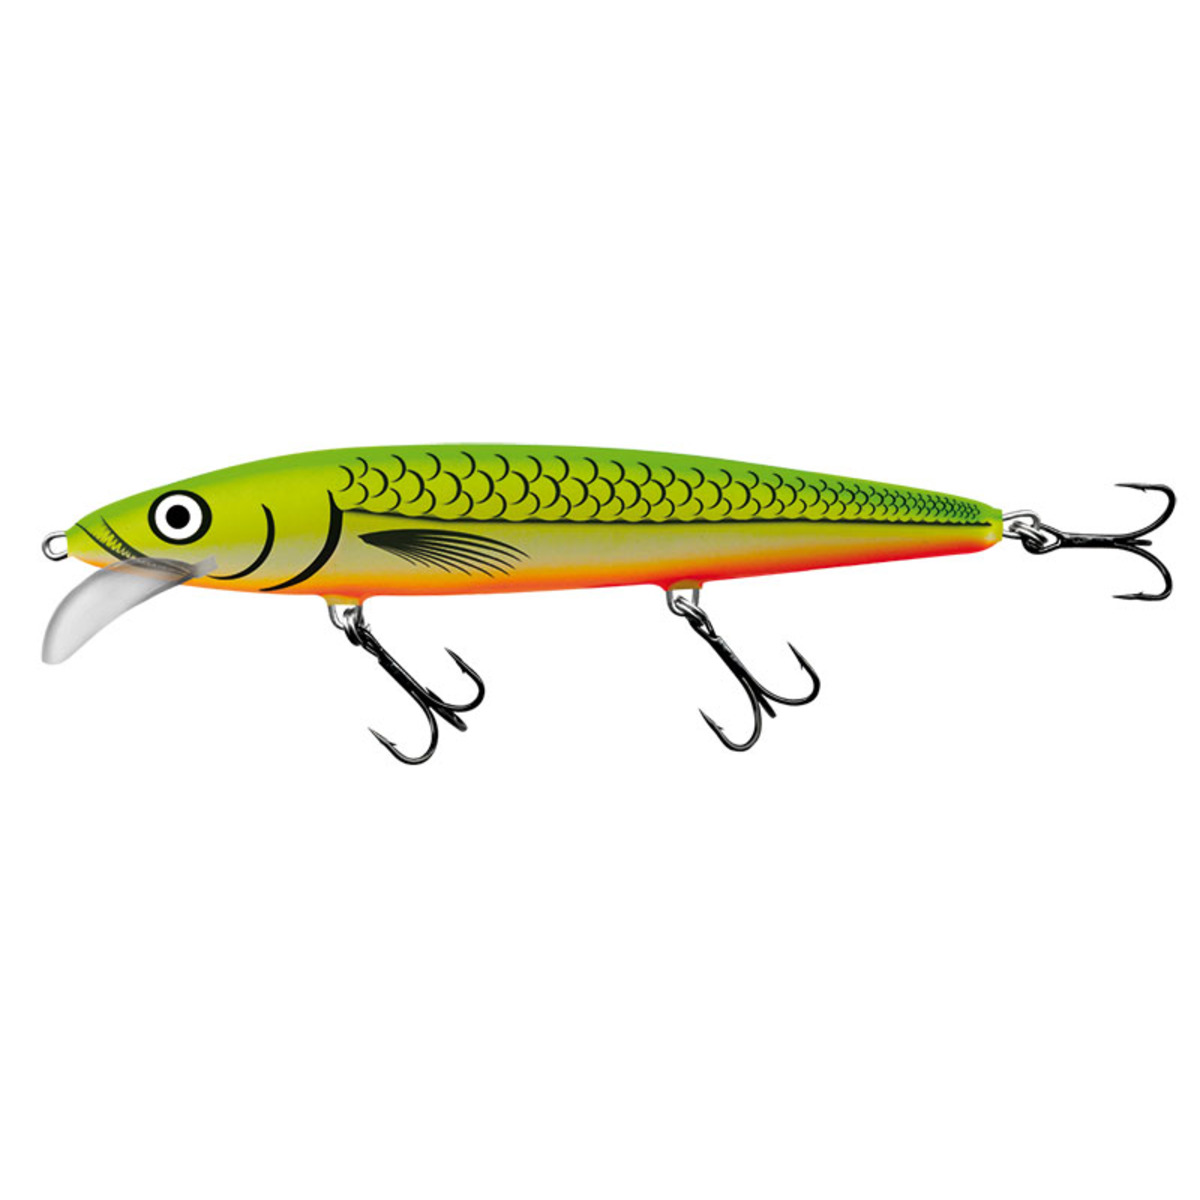 Salmo Whacky Floating - 15 Cm - Glowing Fluorescent Fish